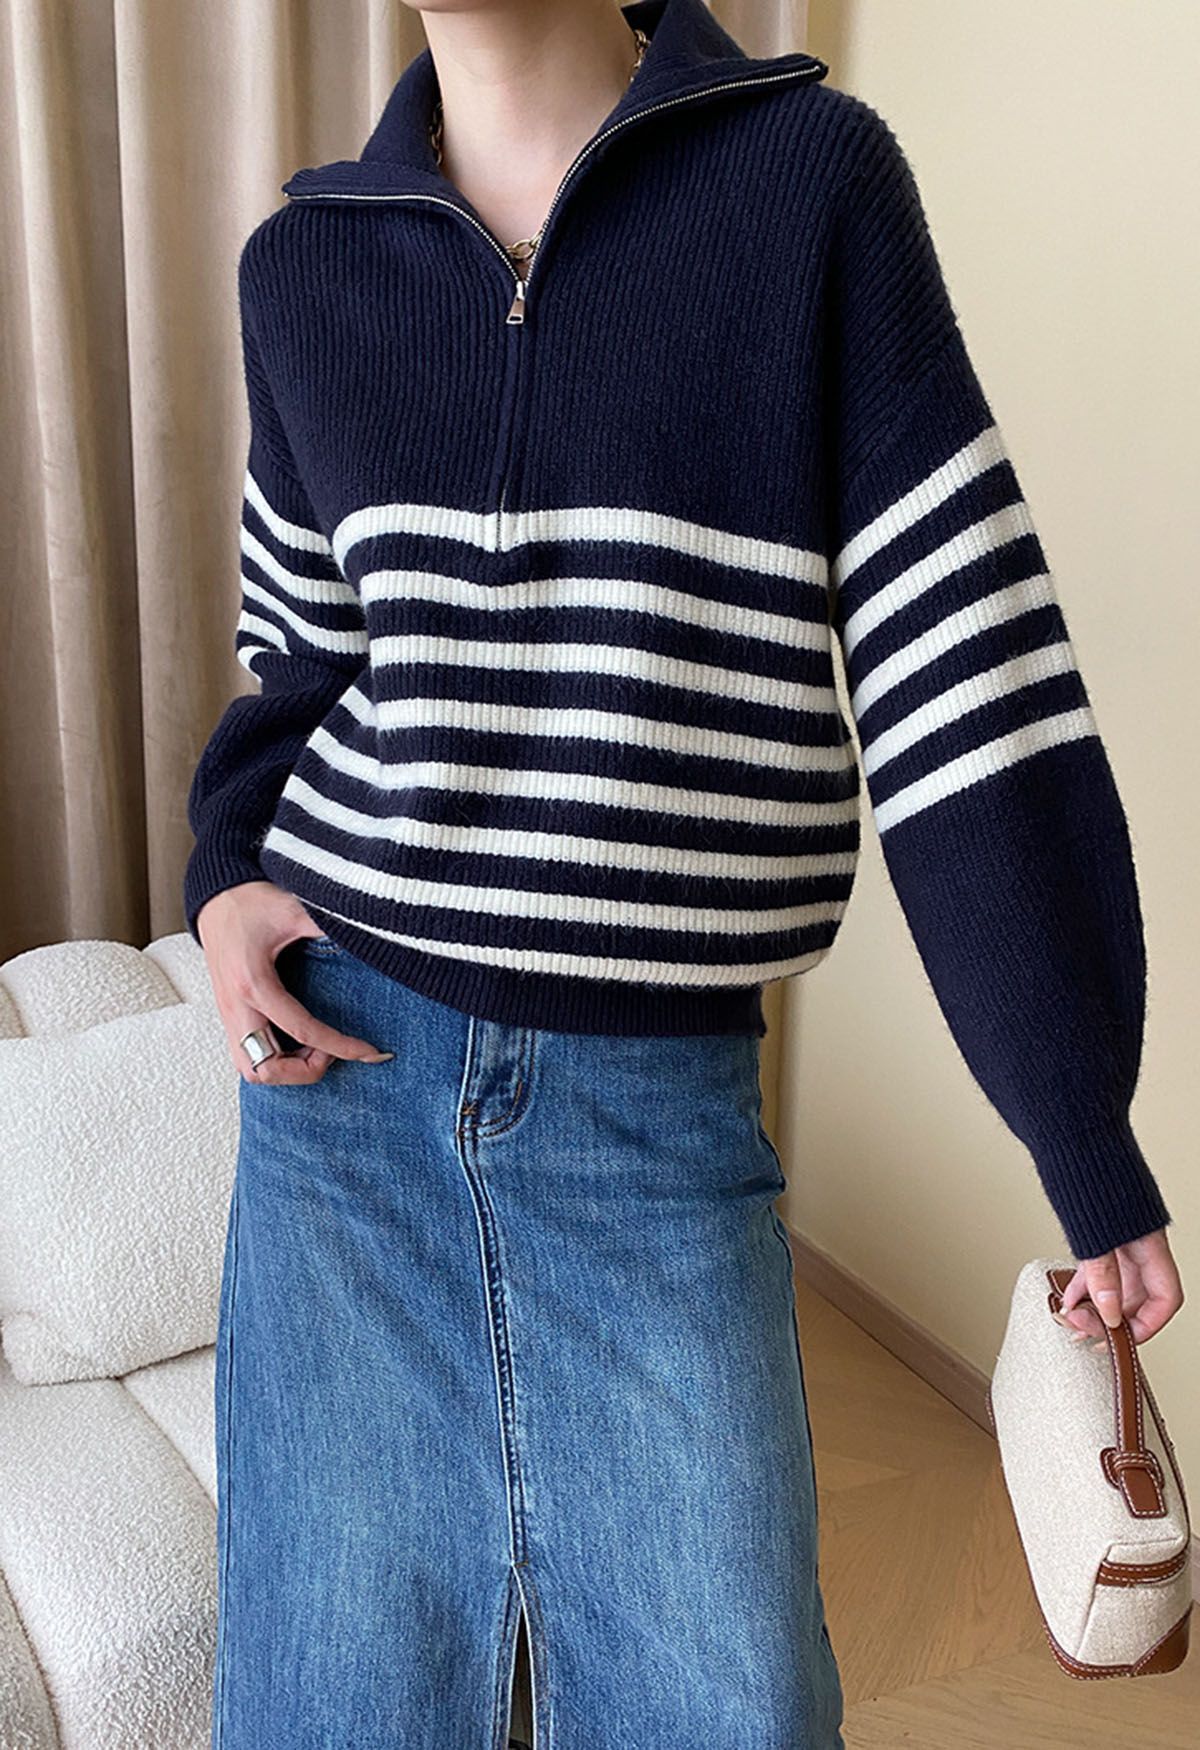 Flap Collar Zipper Neck Striped Knit Sweater in Navy | Chicwish